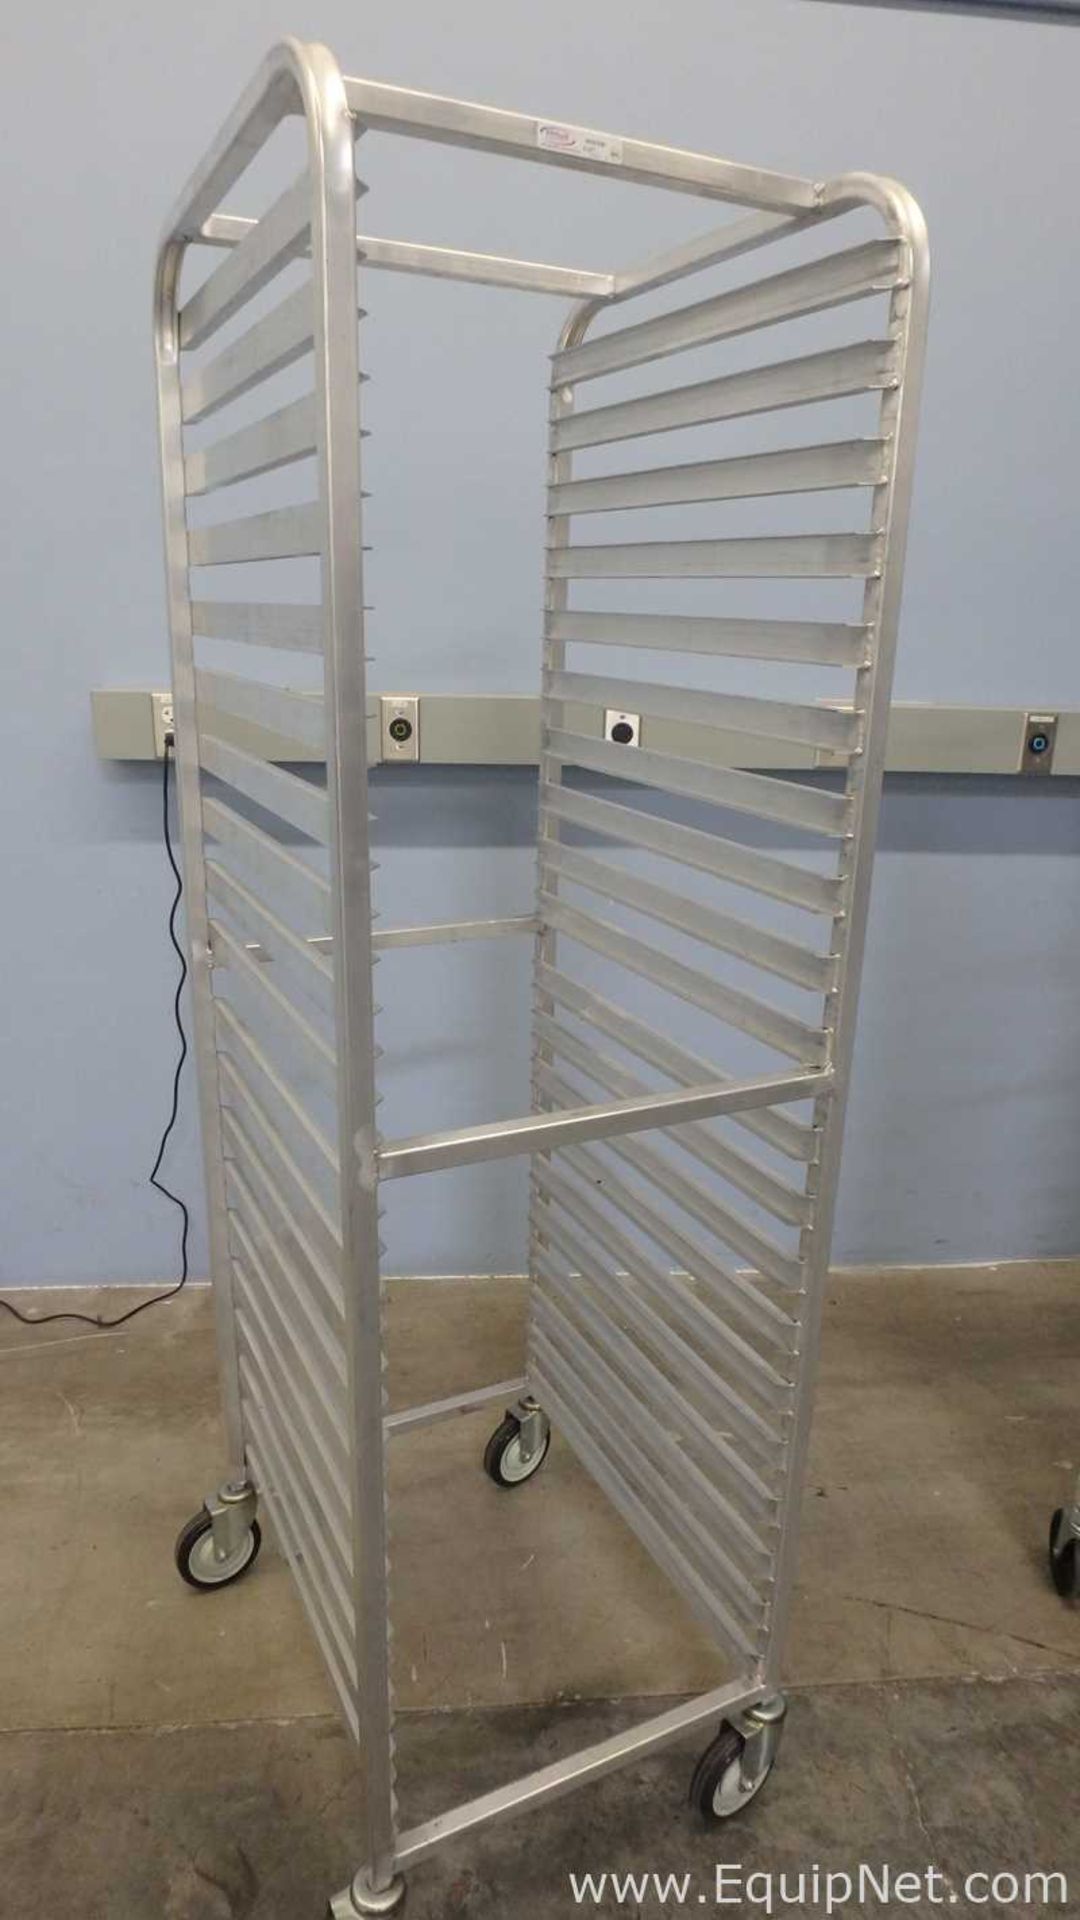 Lot of 3 Mobile Pan Rack Full Height Open Sides with Slides for 40 18inx26in Pans - Image 5 of 10